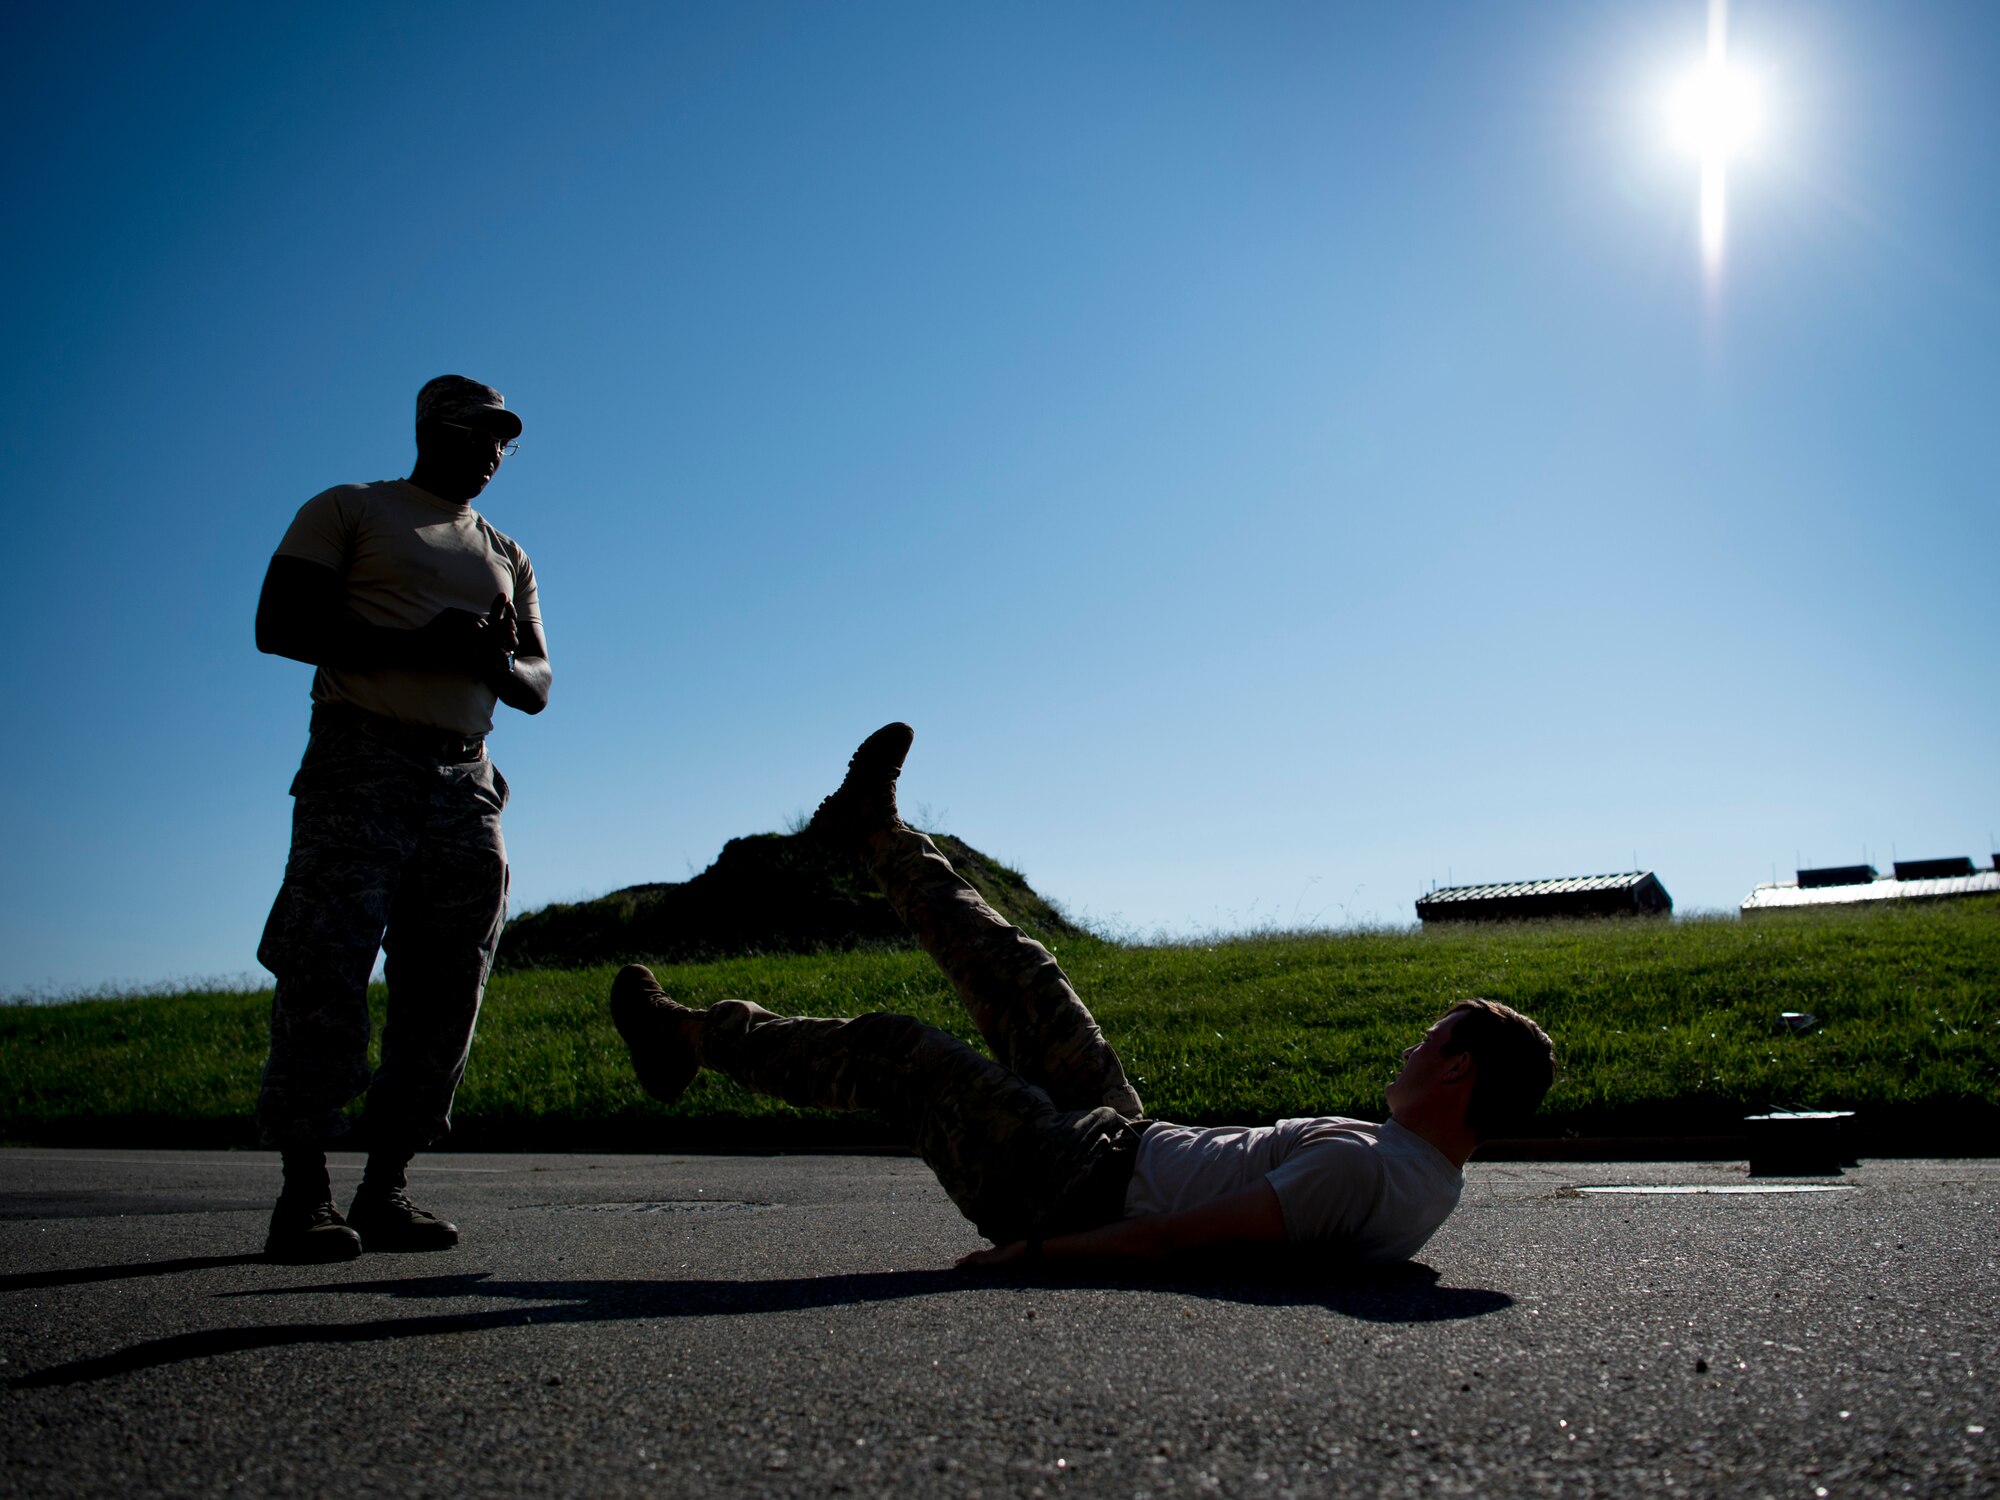 U.S. Air Force Tech. Sgt. Alexis Rice, Air Combat Command Directorate of Logistics, Engineering and Force Protection NCO in charge of mission assurance, watches Senior Airman Jeffrey Lewis, 822nd Base Defense Squadron fire team leader, perform flutter kicks during a physical training test as part of Air Combat Command’s Defender Challenge team selection at Joint Base Langley-Eustis, Virginia, Aug. 24, 2018